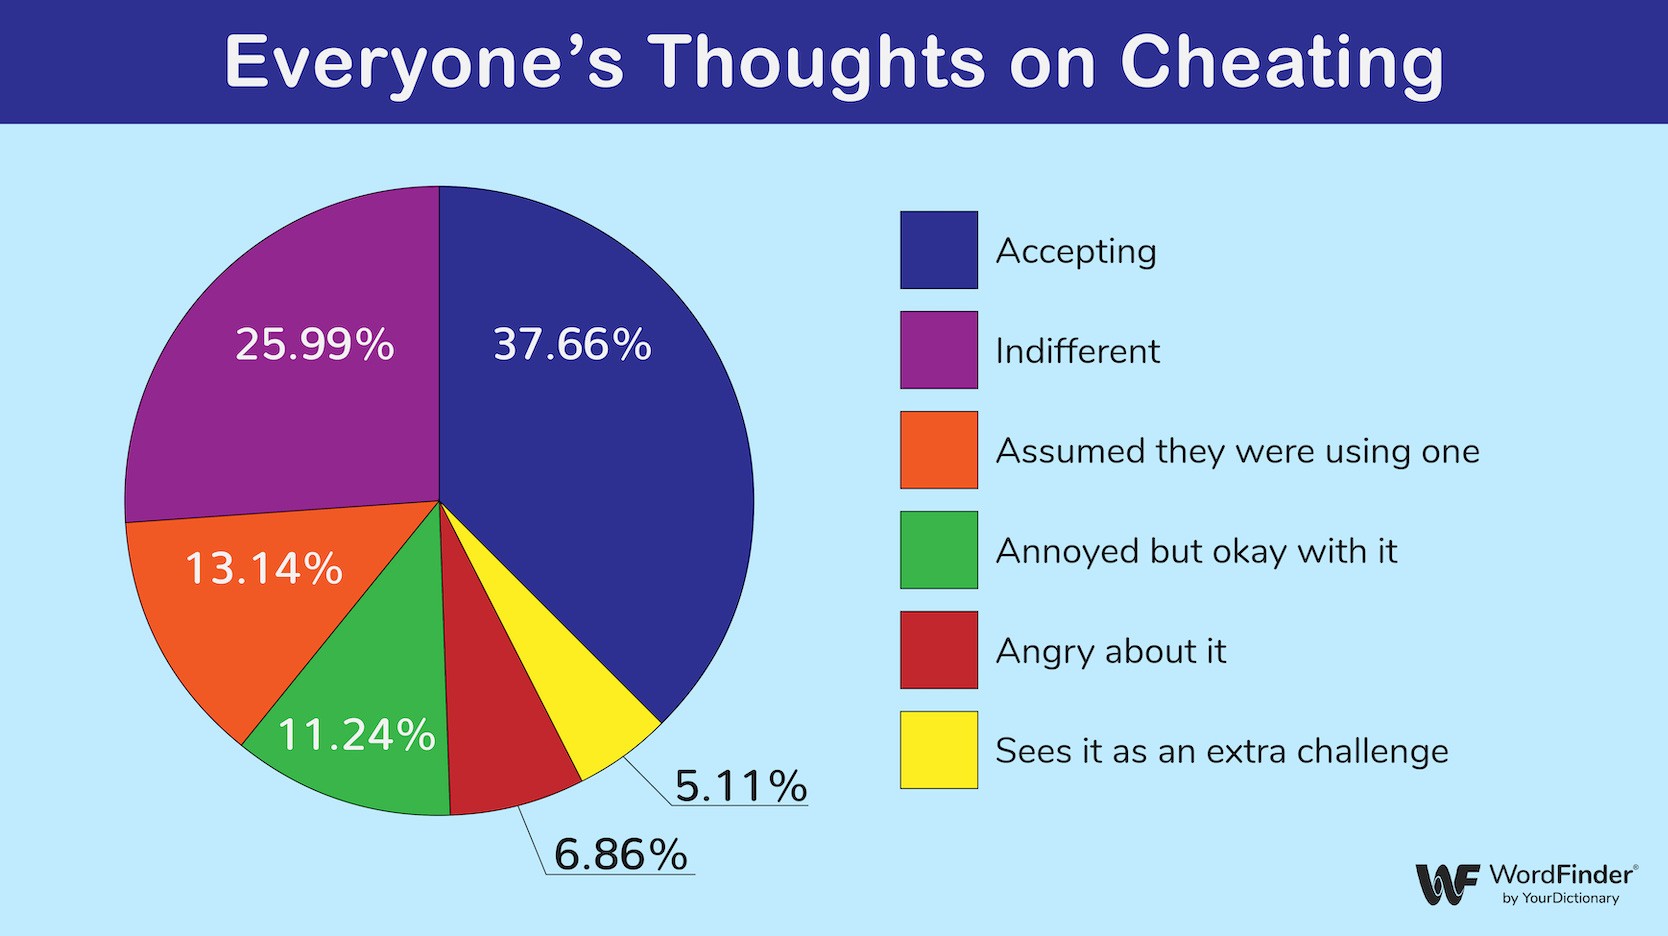 Data on thoughts on cheating